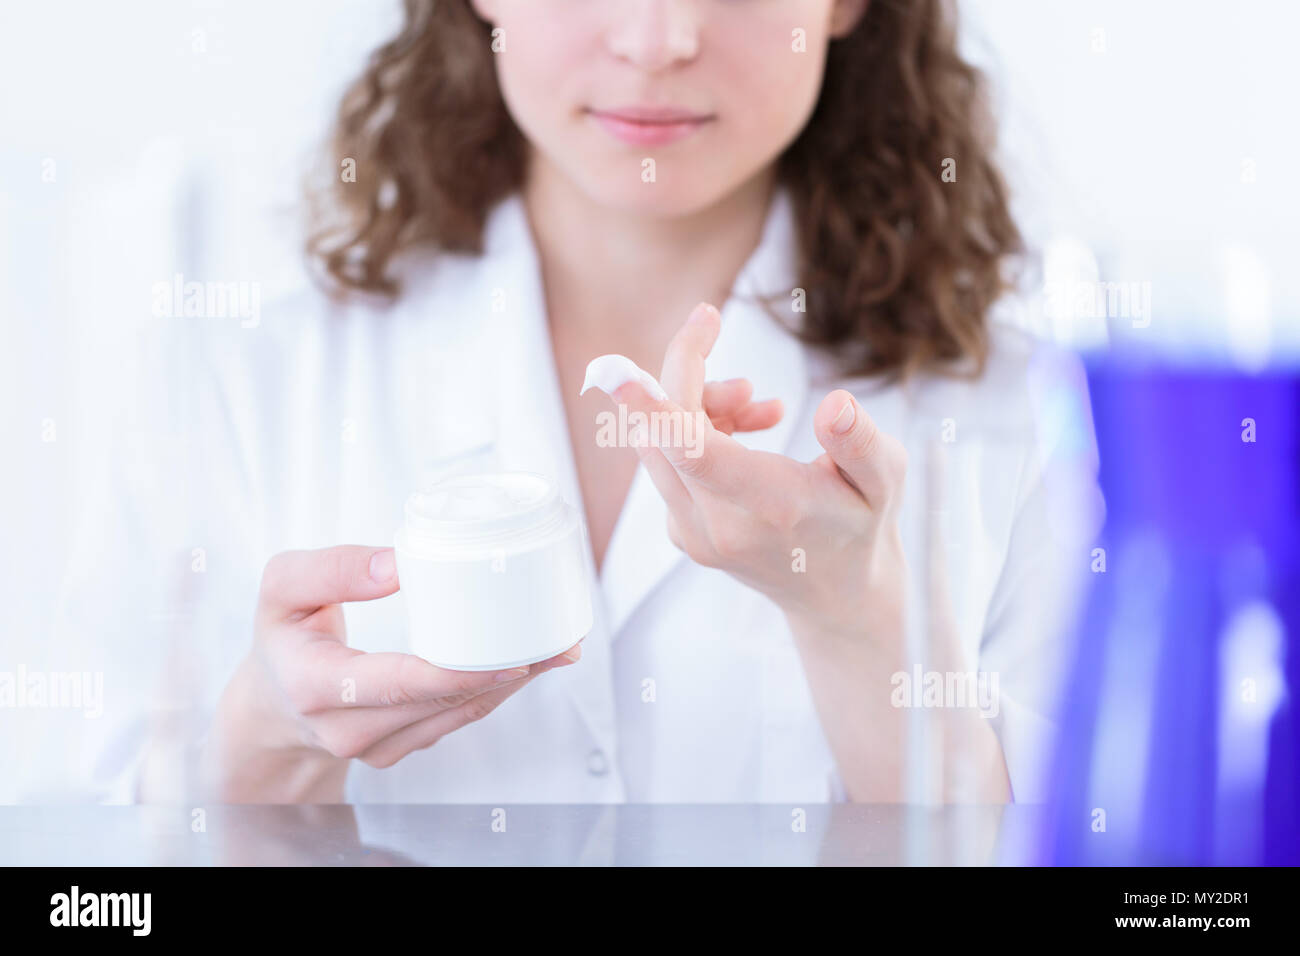 Female chemist in laboratory coat holding a white container and presenting lotion on her finger Stock Photo